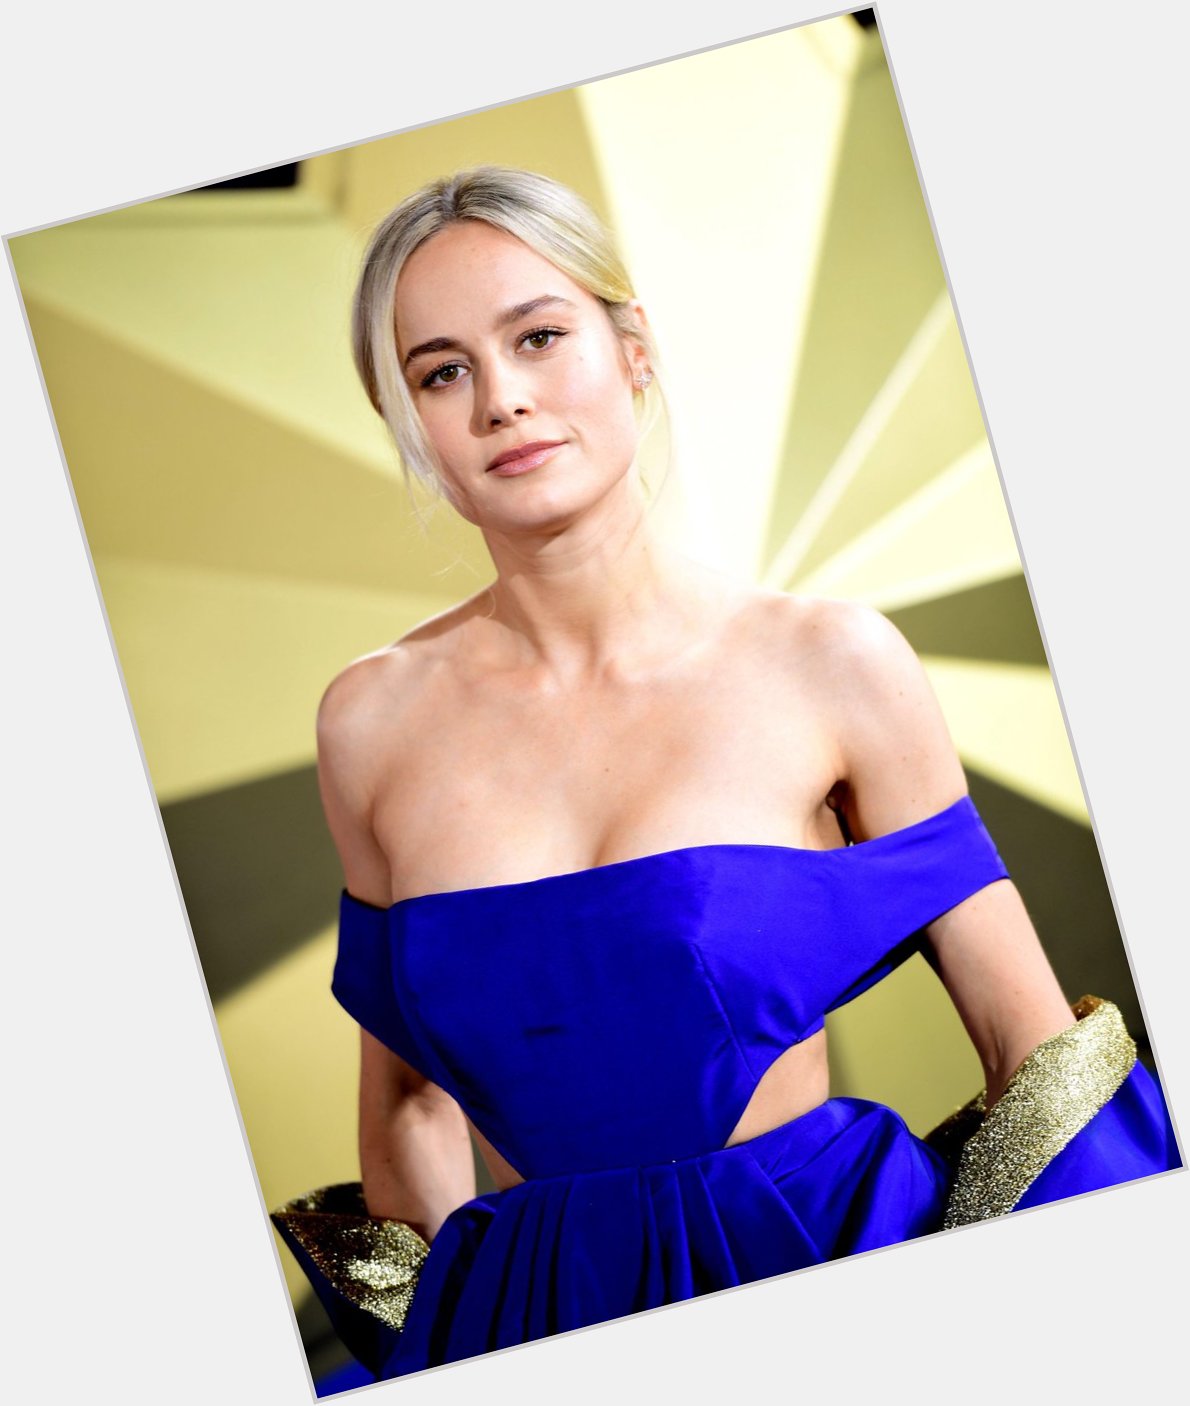 Happy birthday Brie Larson! Good timing as I\m really into her at the moment 